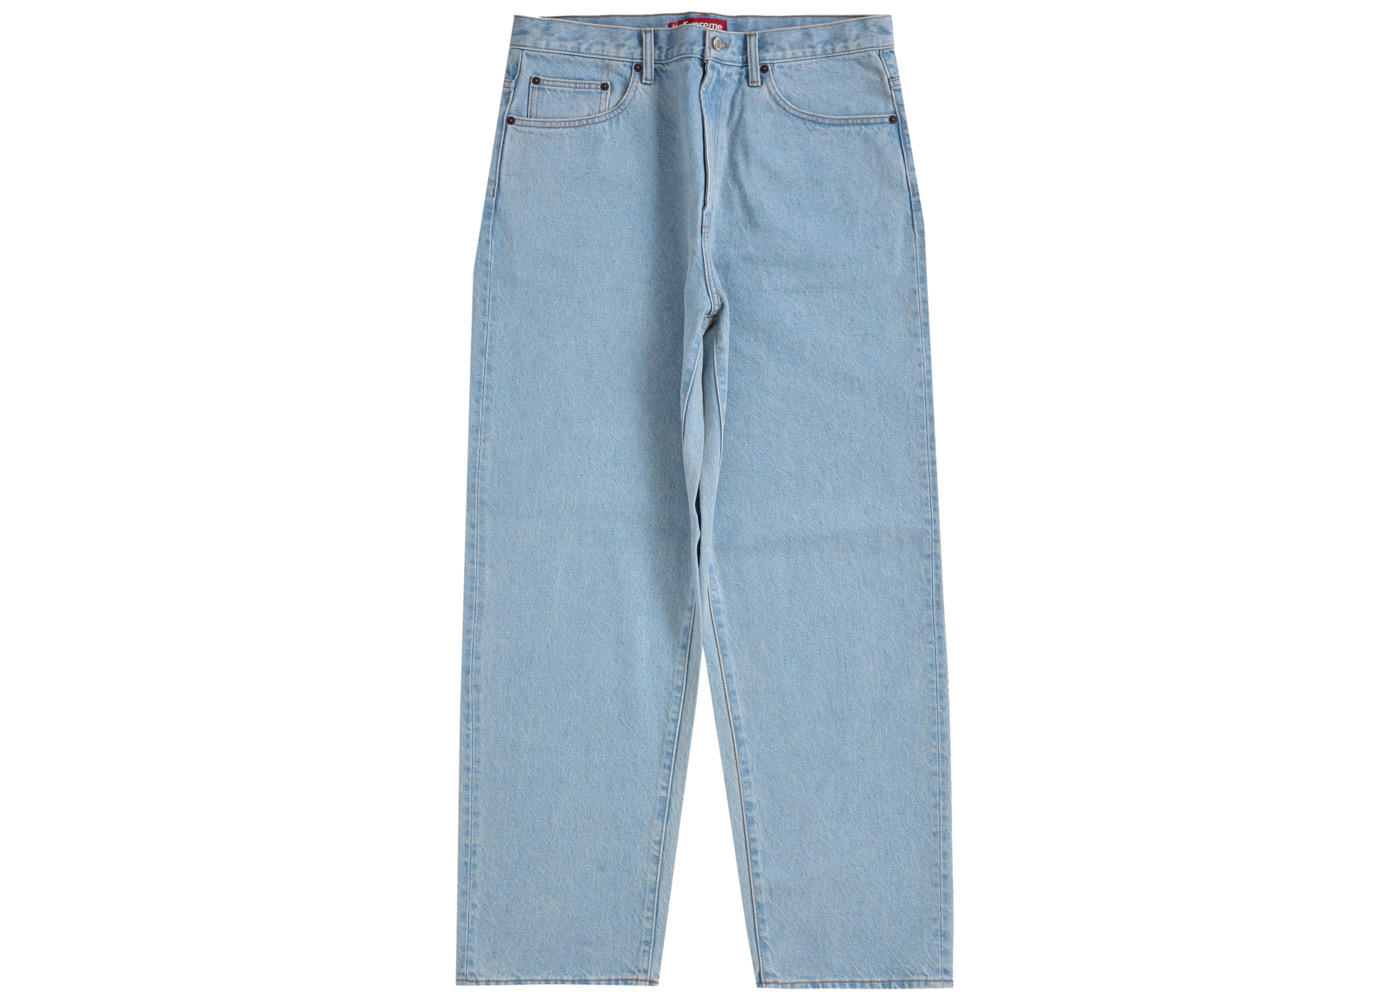 Supreme Baggy Jean Washed Indigo Men's - Permanent Collection - US